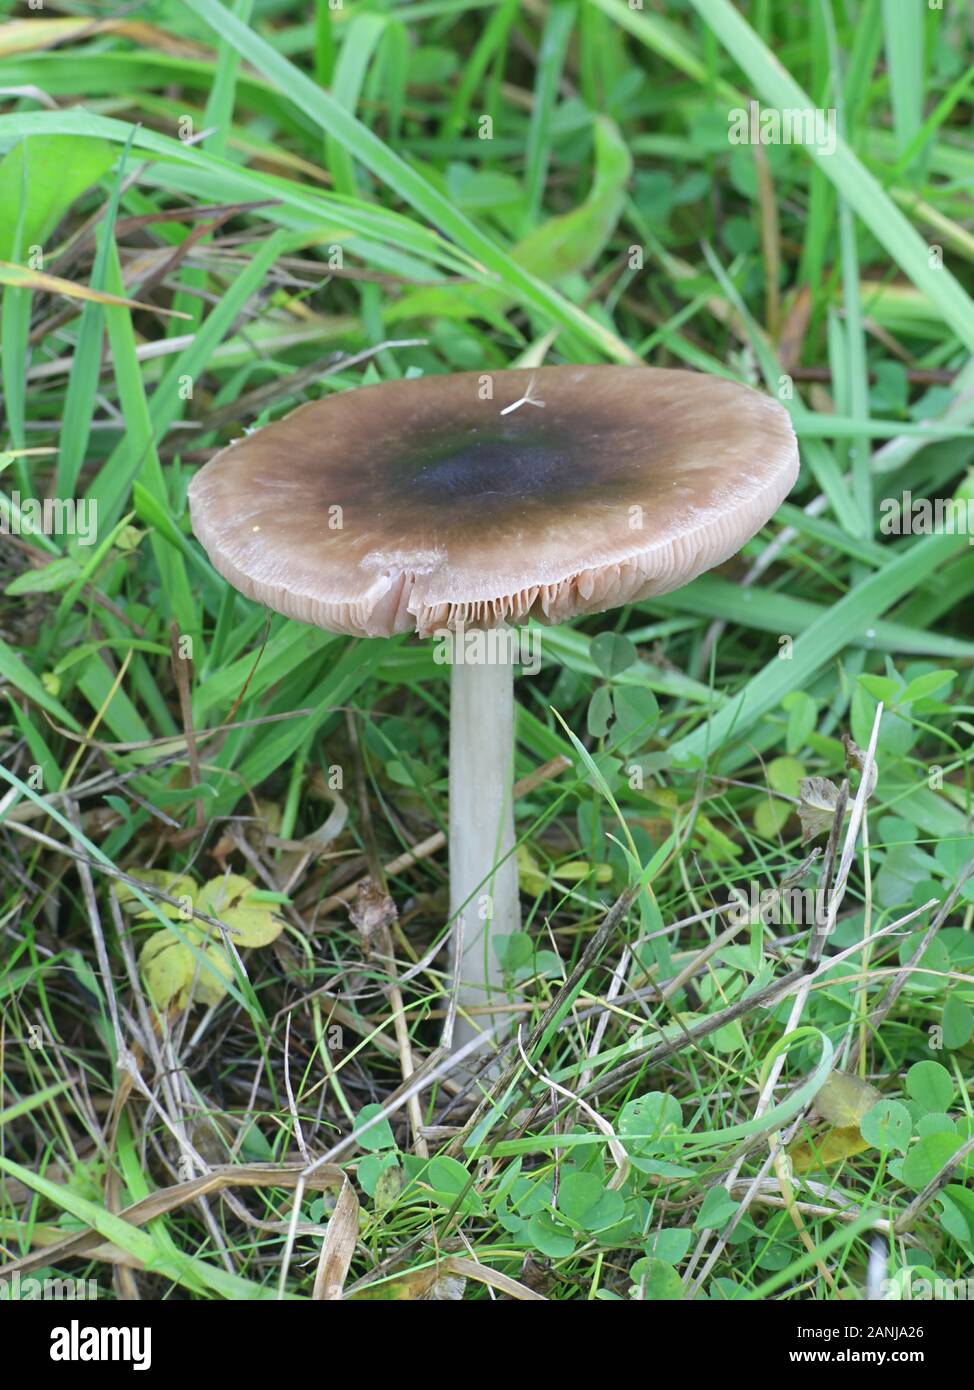 Volvopluteus gloiocephalus, known as the big sheath mushroom, rose-gilled grisette, or stubble rosegill, mushrooms from Finland Stock Photo